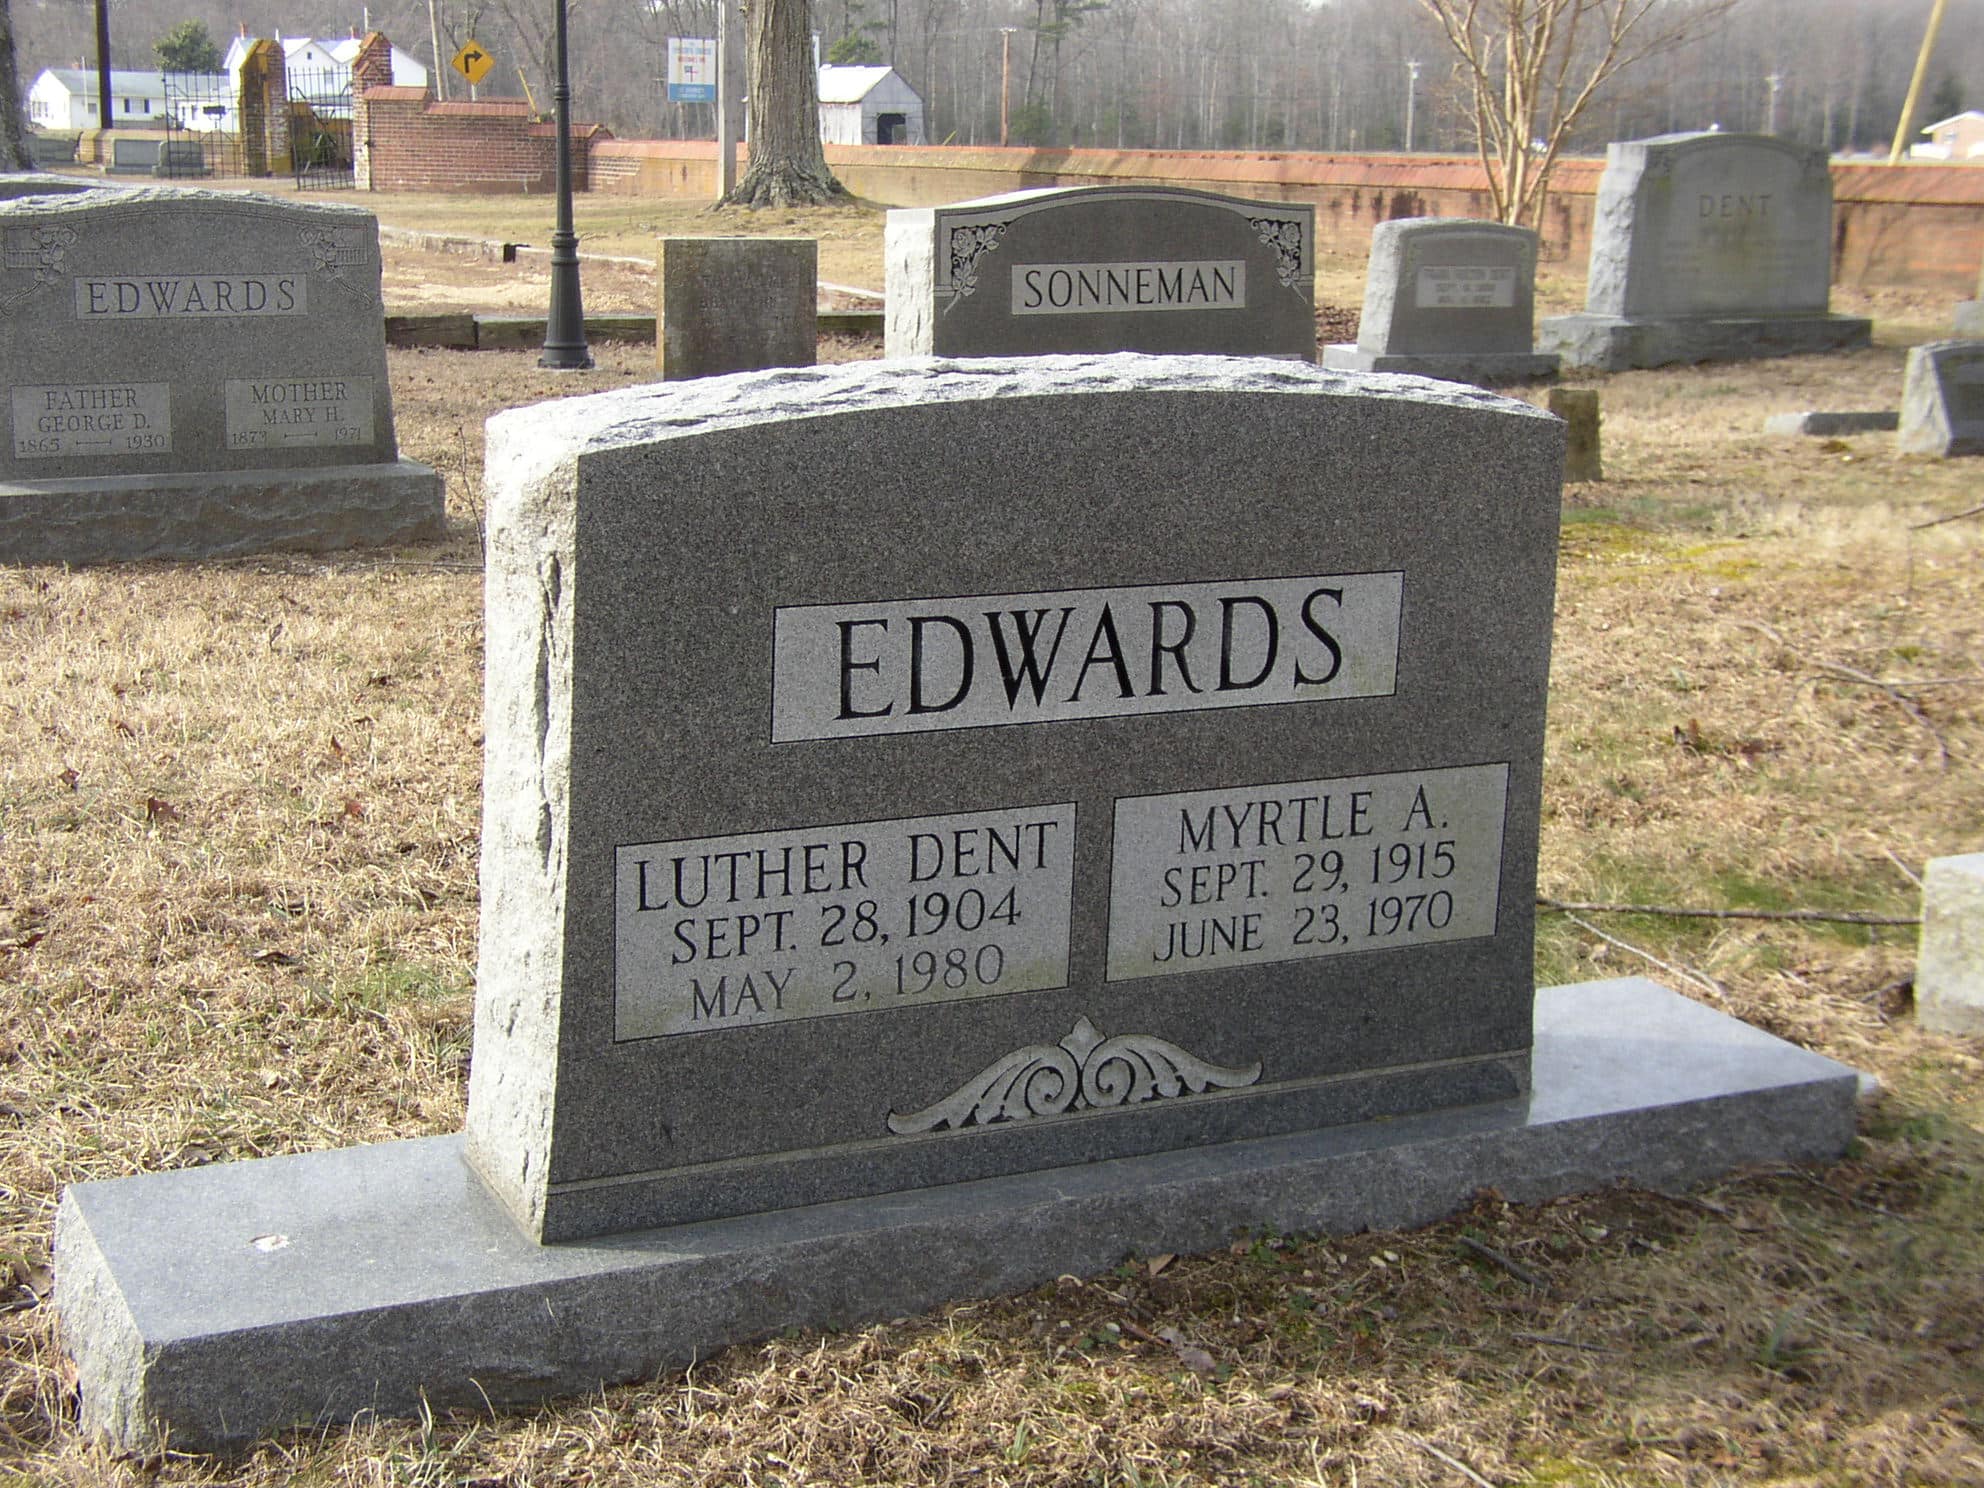 The gravestone of my grandparents - Luther and Myrtle Edwards